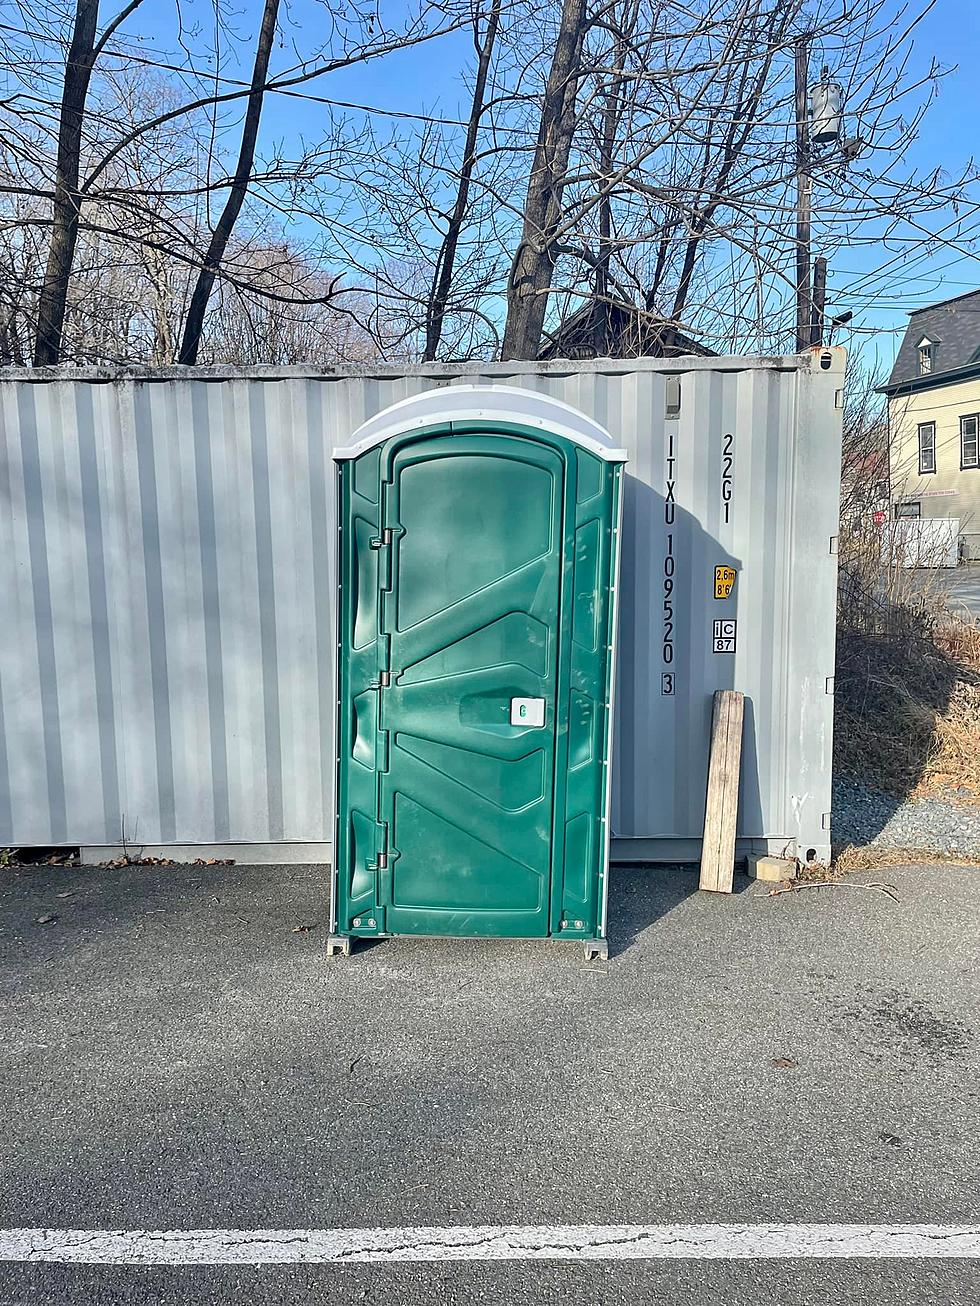 Porta Potty Predicament; “Whose Potty Is This?” Ellsworth Man Wants To Know.